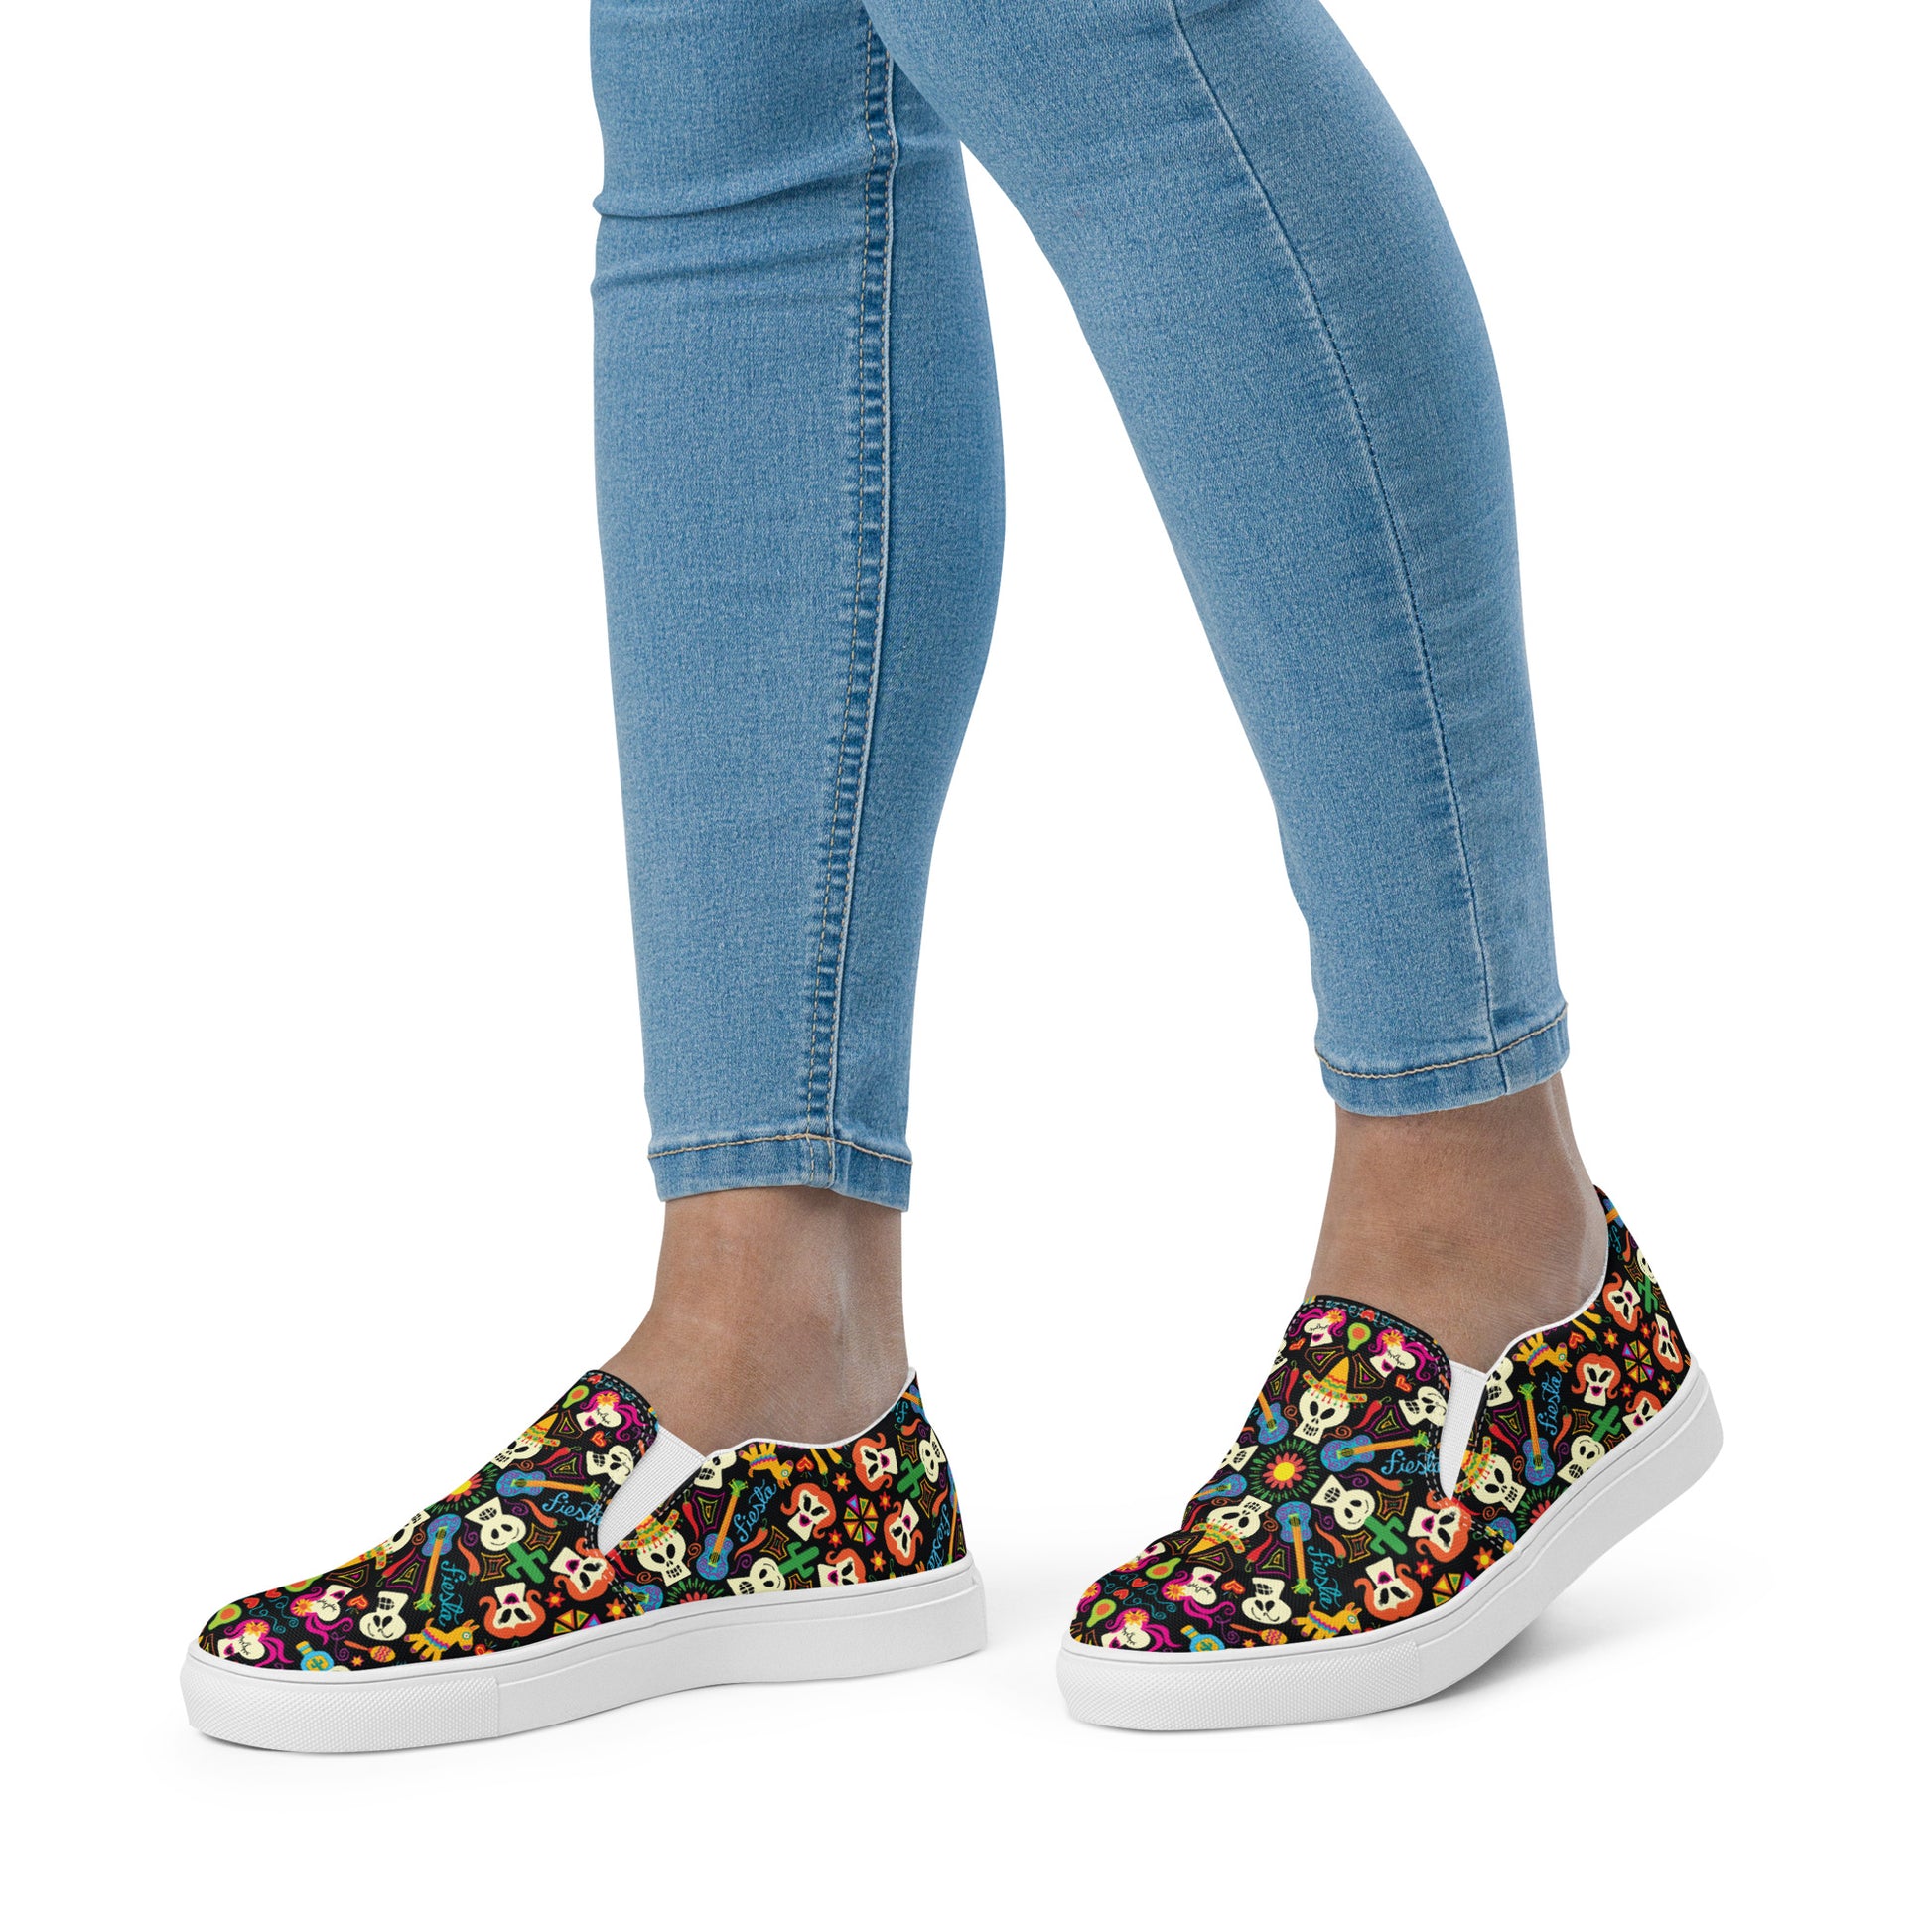 Day of the dead Mexican holiday Women’s slip-on canvas shoes. Lifestyle